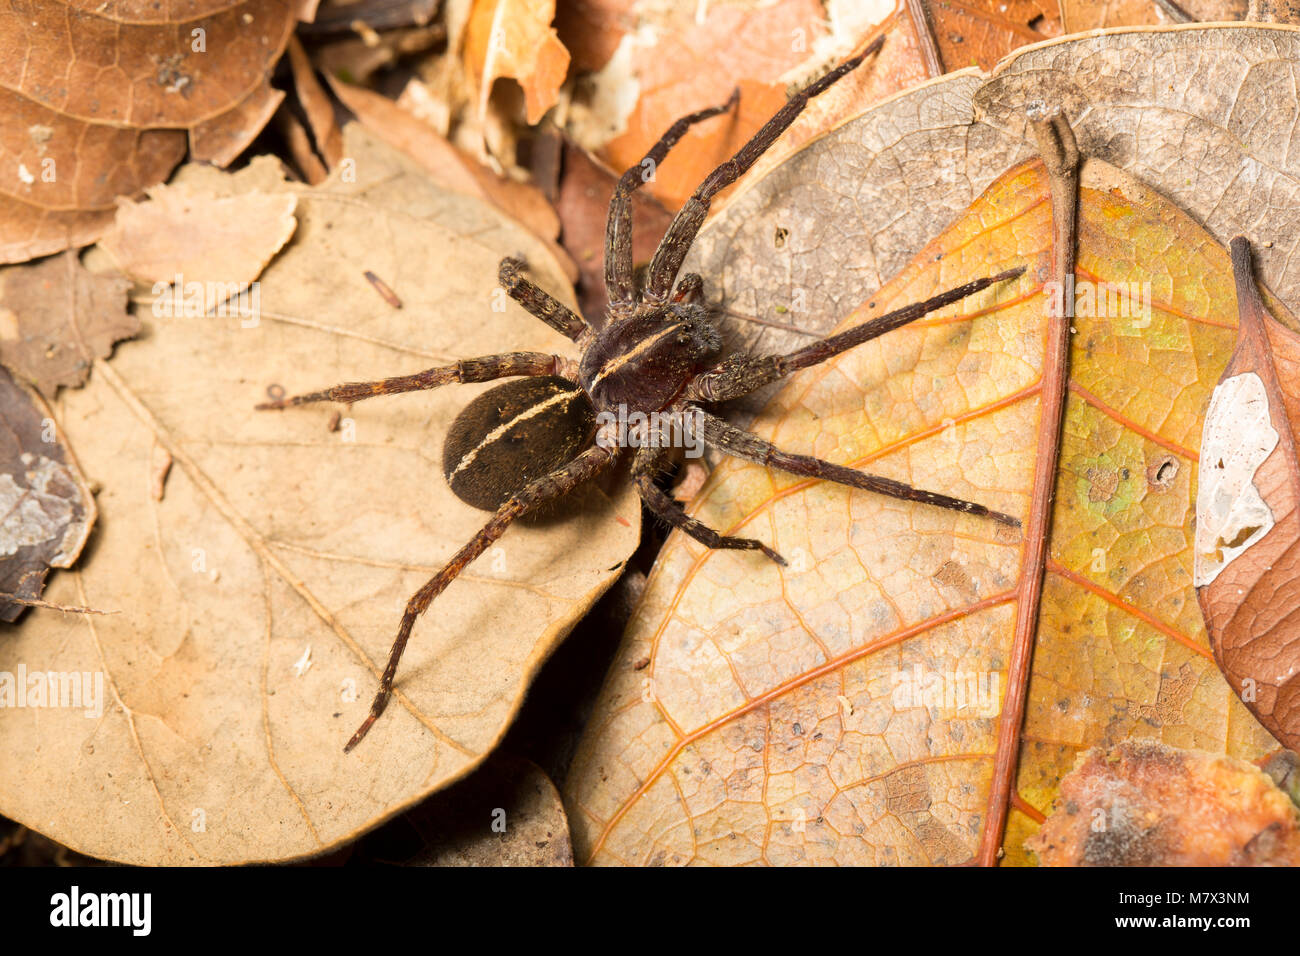 Spider in the jungle at Raleighvallen nature reserve, Suriname, South America Stock Photo